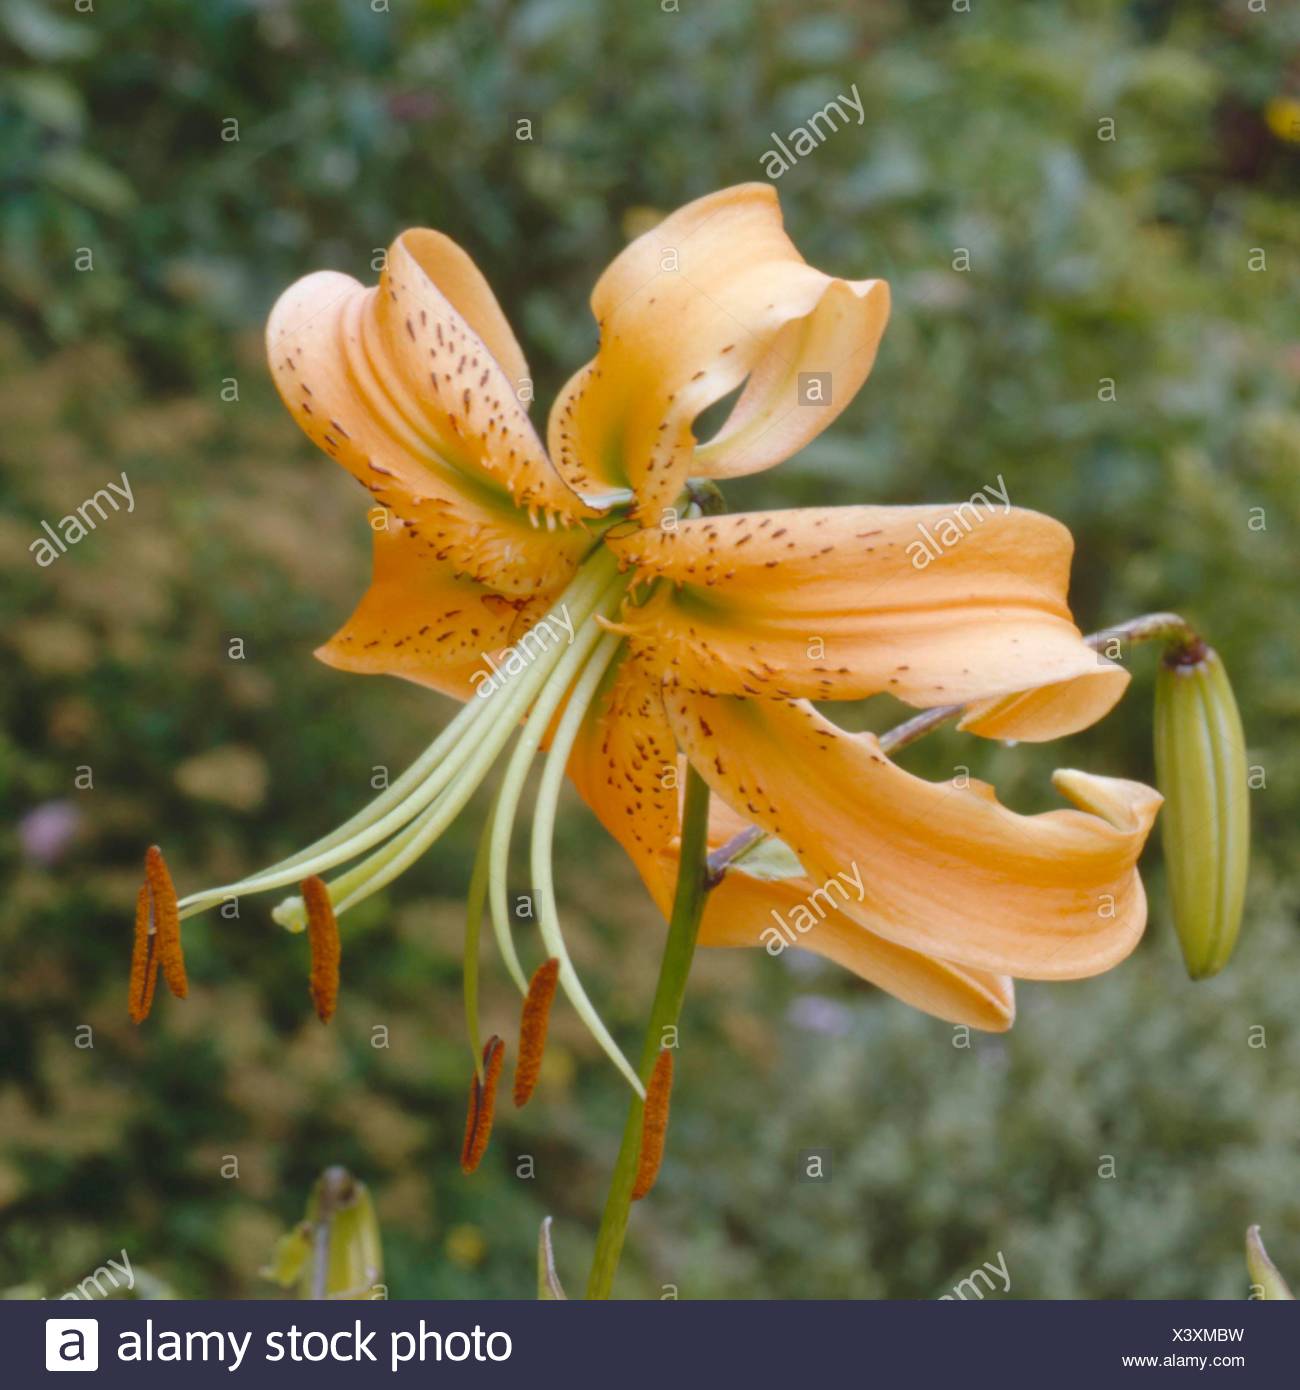 Henryi Lily High Resolution Stock Photography and Images - Alamy